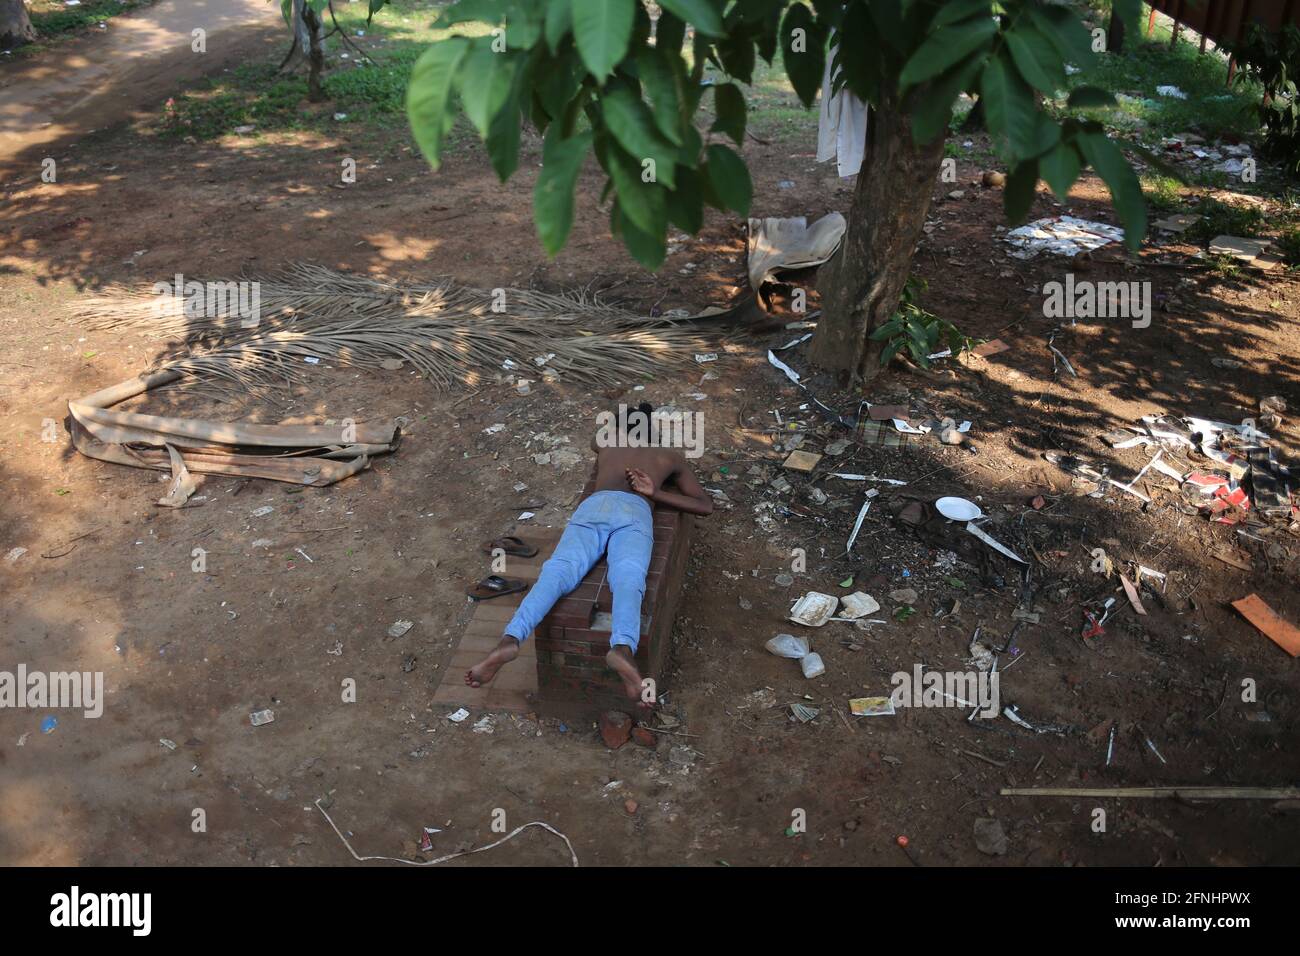 Dhaka, Bangladesh. 17th May, 2021. A homeless person is sleeping on a bench of a park during the 2nd wave of COVID-19 pandemic in Dhaka, Bangladesh on May 17, 2021. Credit: Md. Rakibul Hasan/ZUMA Wire/Alamy Live News Stock Photo